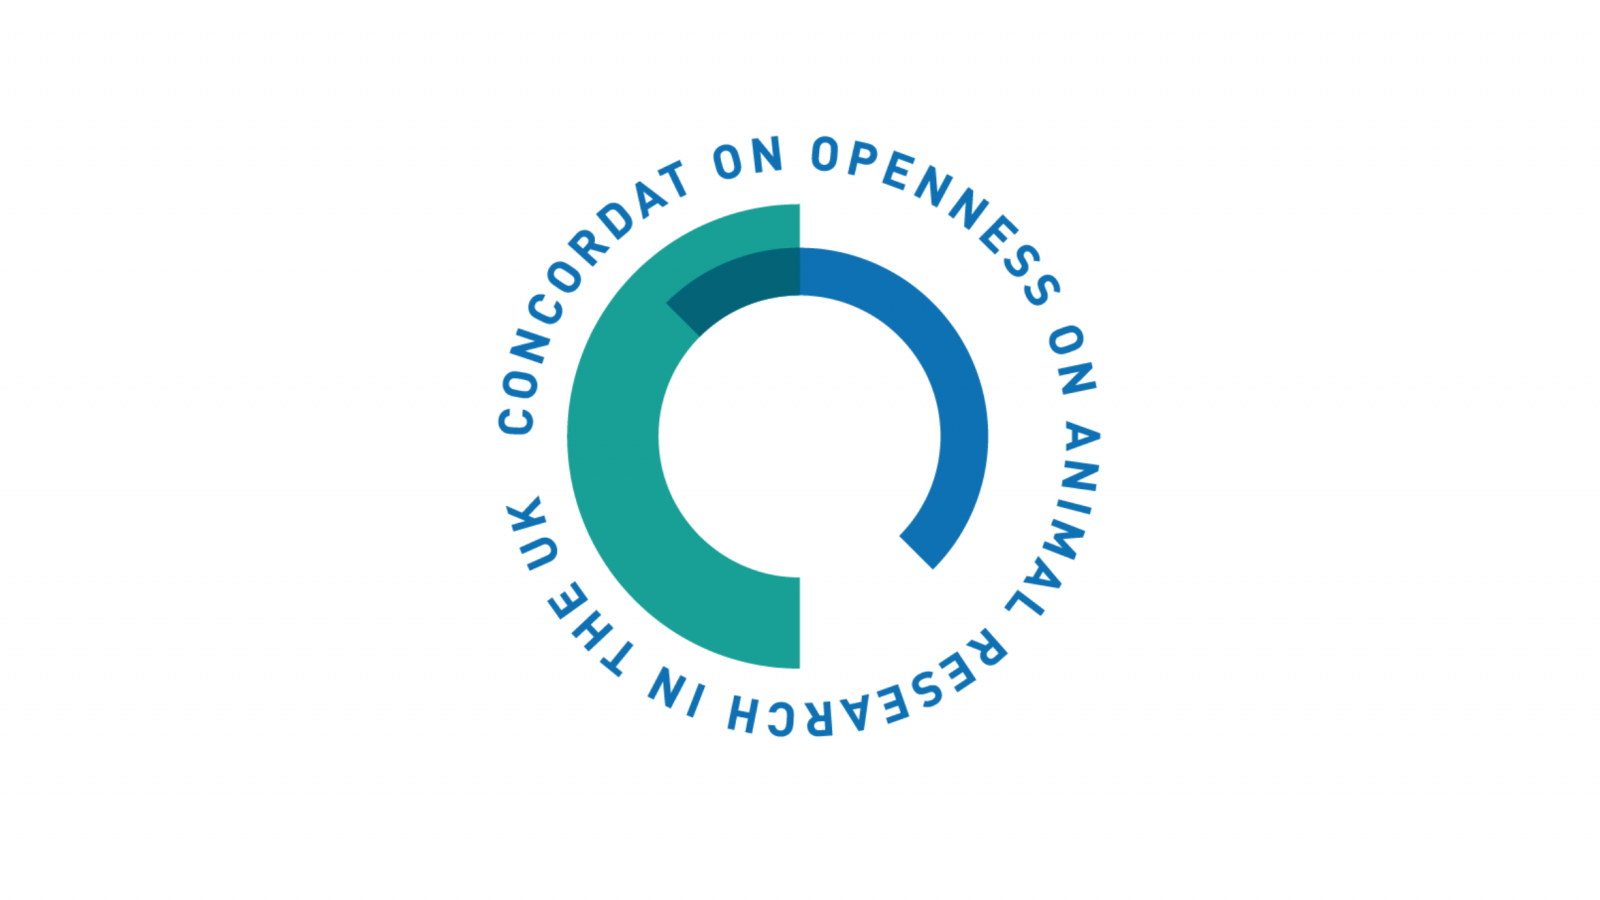 Concordat on Openness on Animal Research launched today